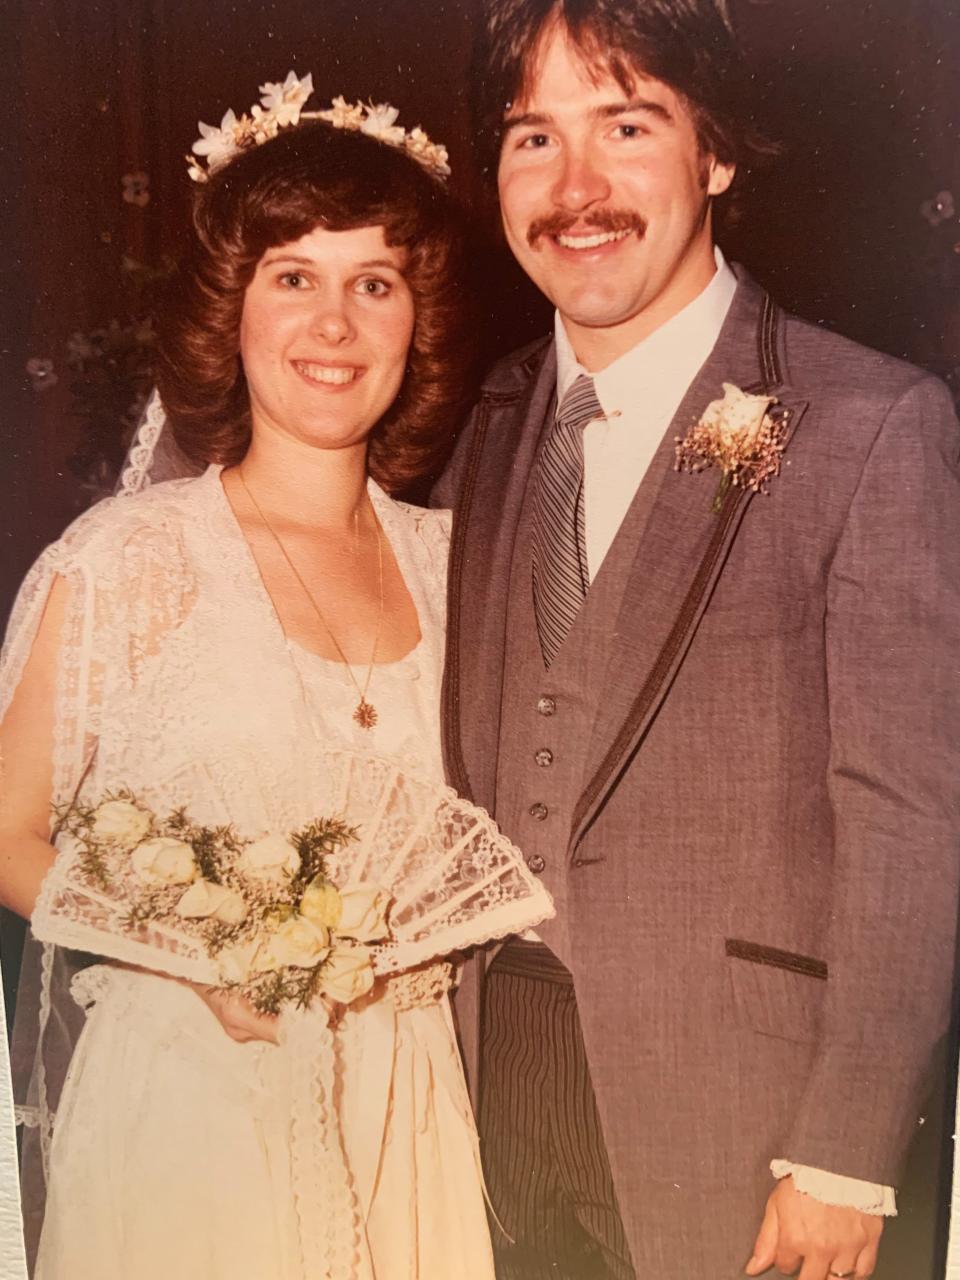 Mary and Bill Sherlach were married on April 25th, 1981.